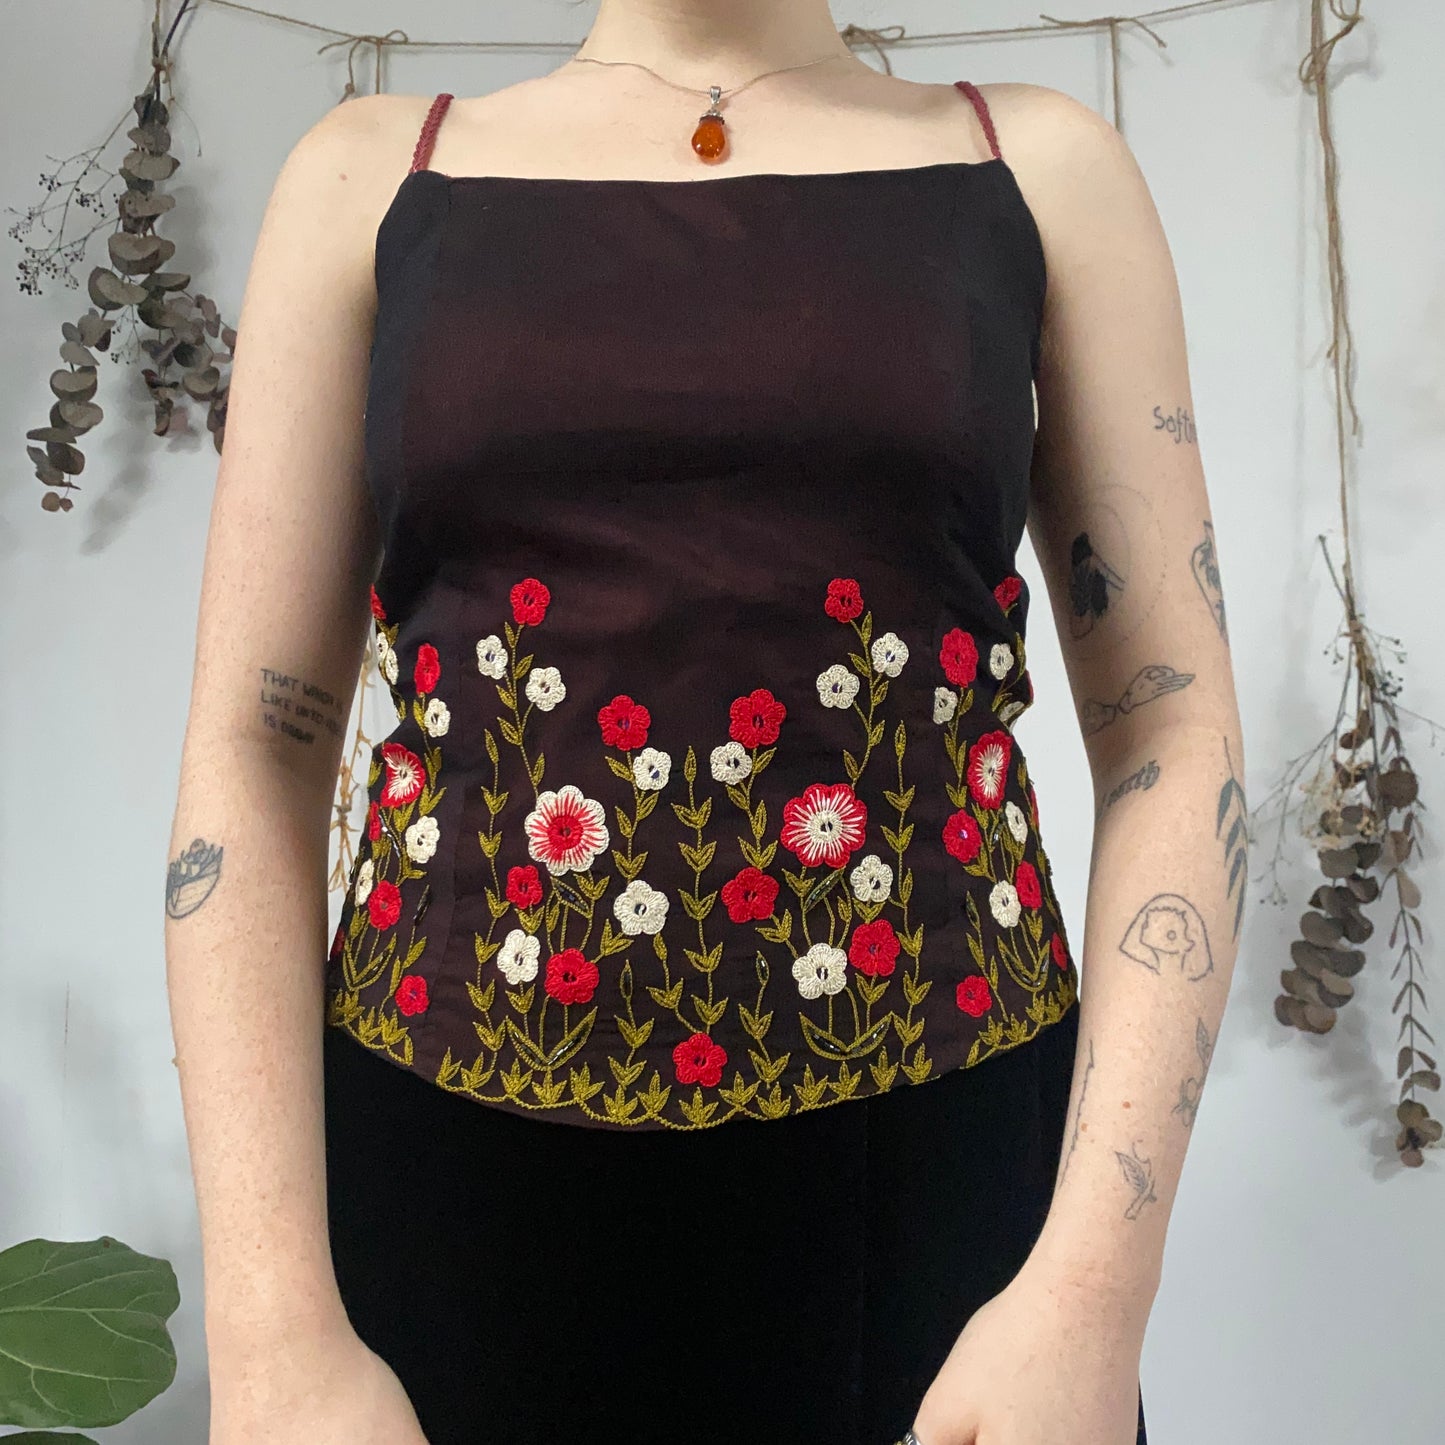 Floral embroidered top - size S/M